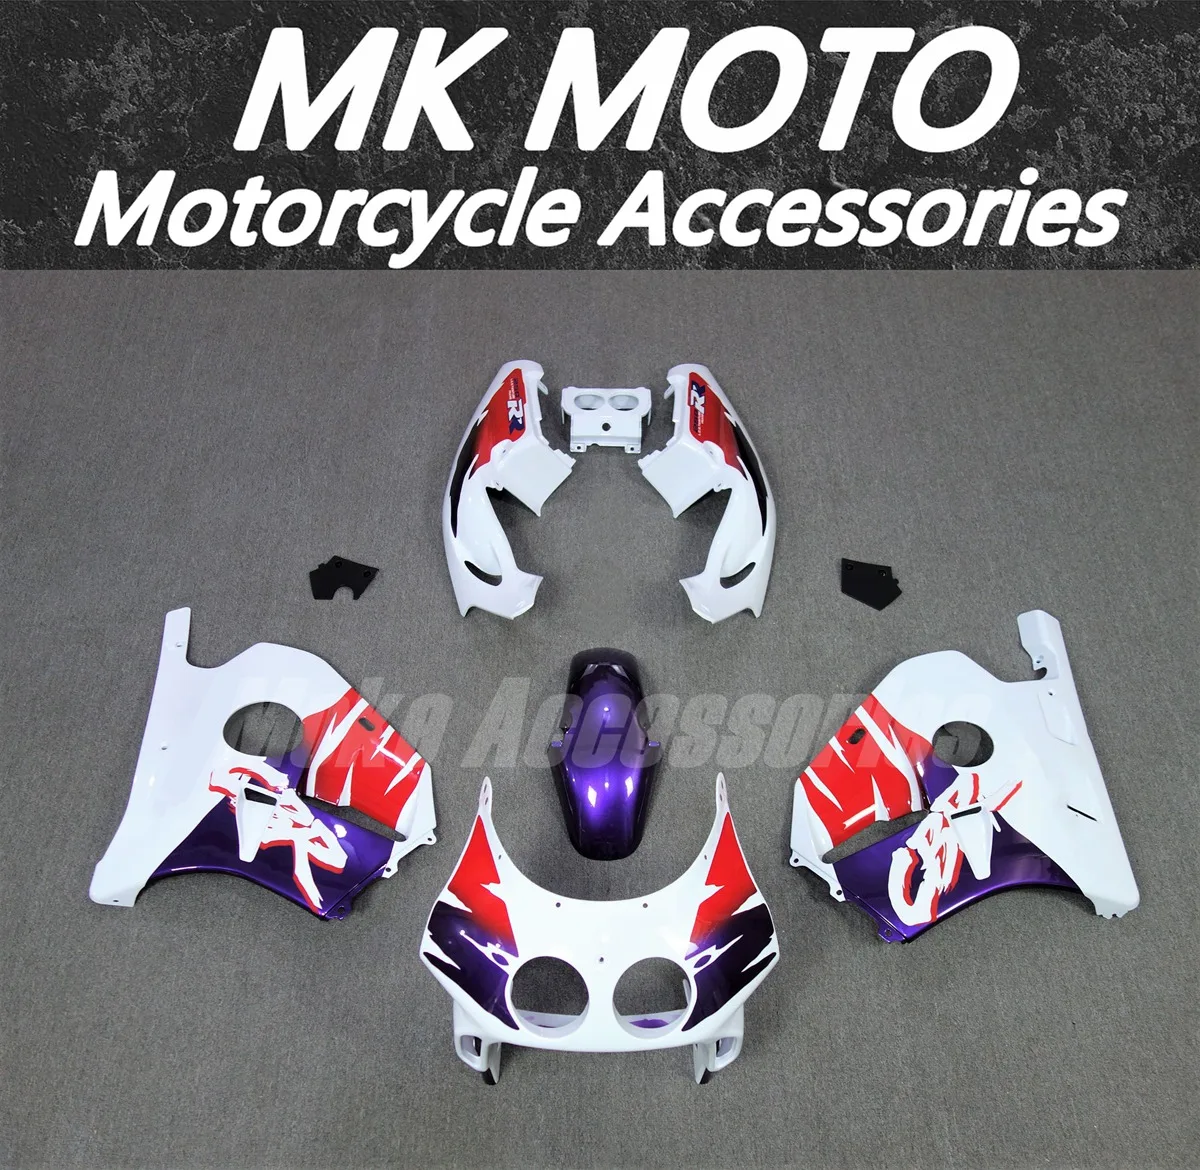 

Fairings Kit Fit For Cbr250rr Mc22 1990 1991 1992 1993 1994-1999 Bodywork Set High Quality ABS Injection Purple White Red